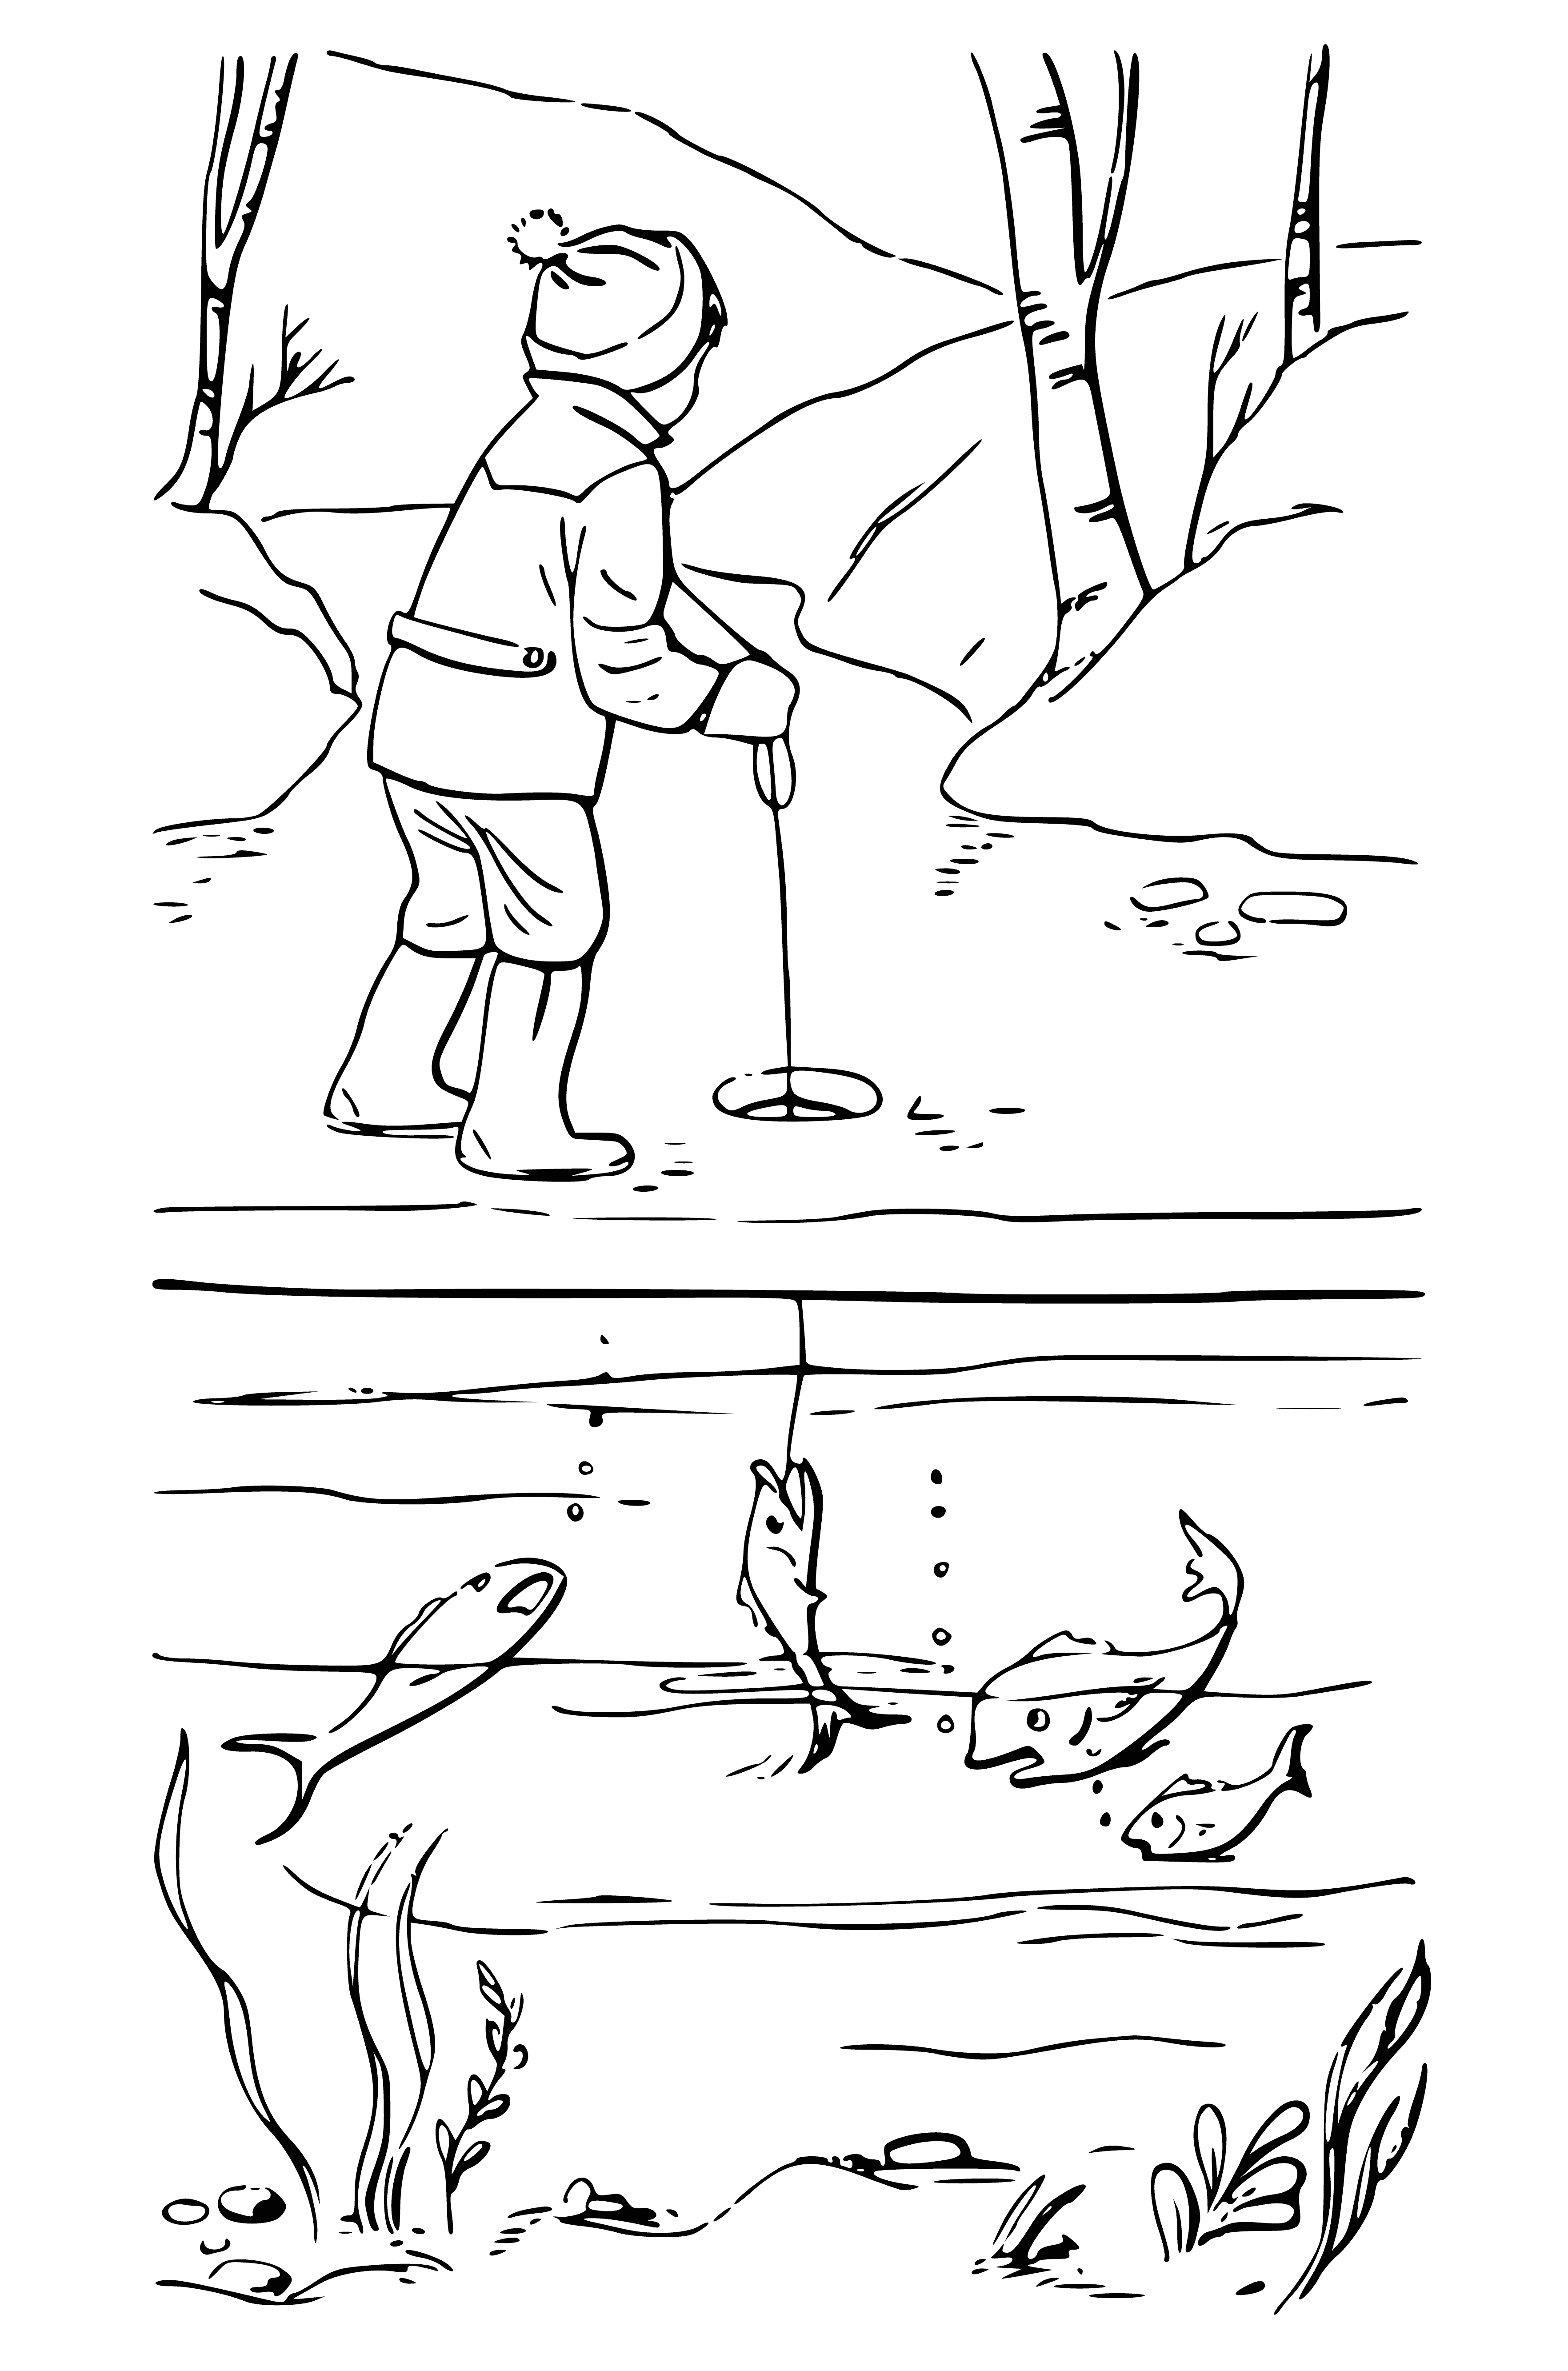 Winter fishing coloring page